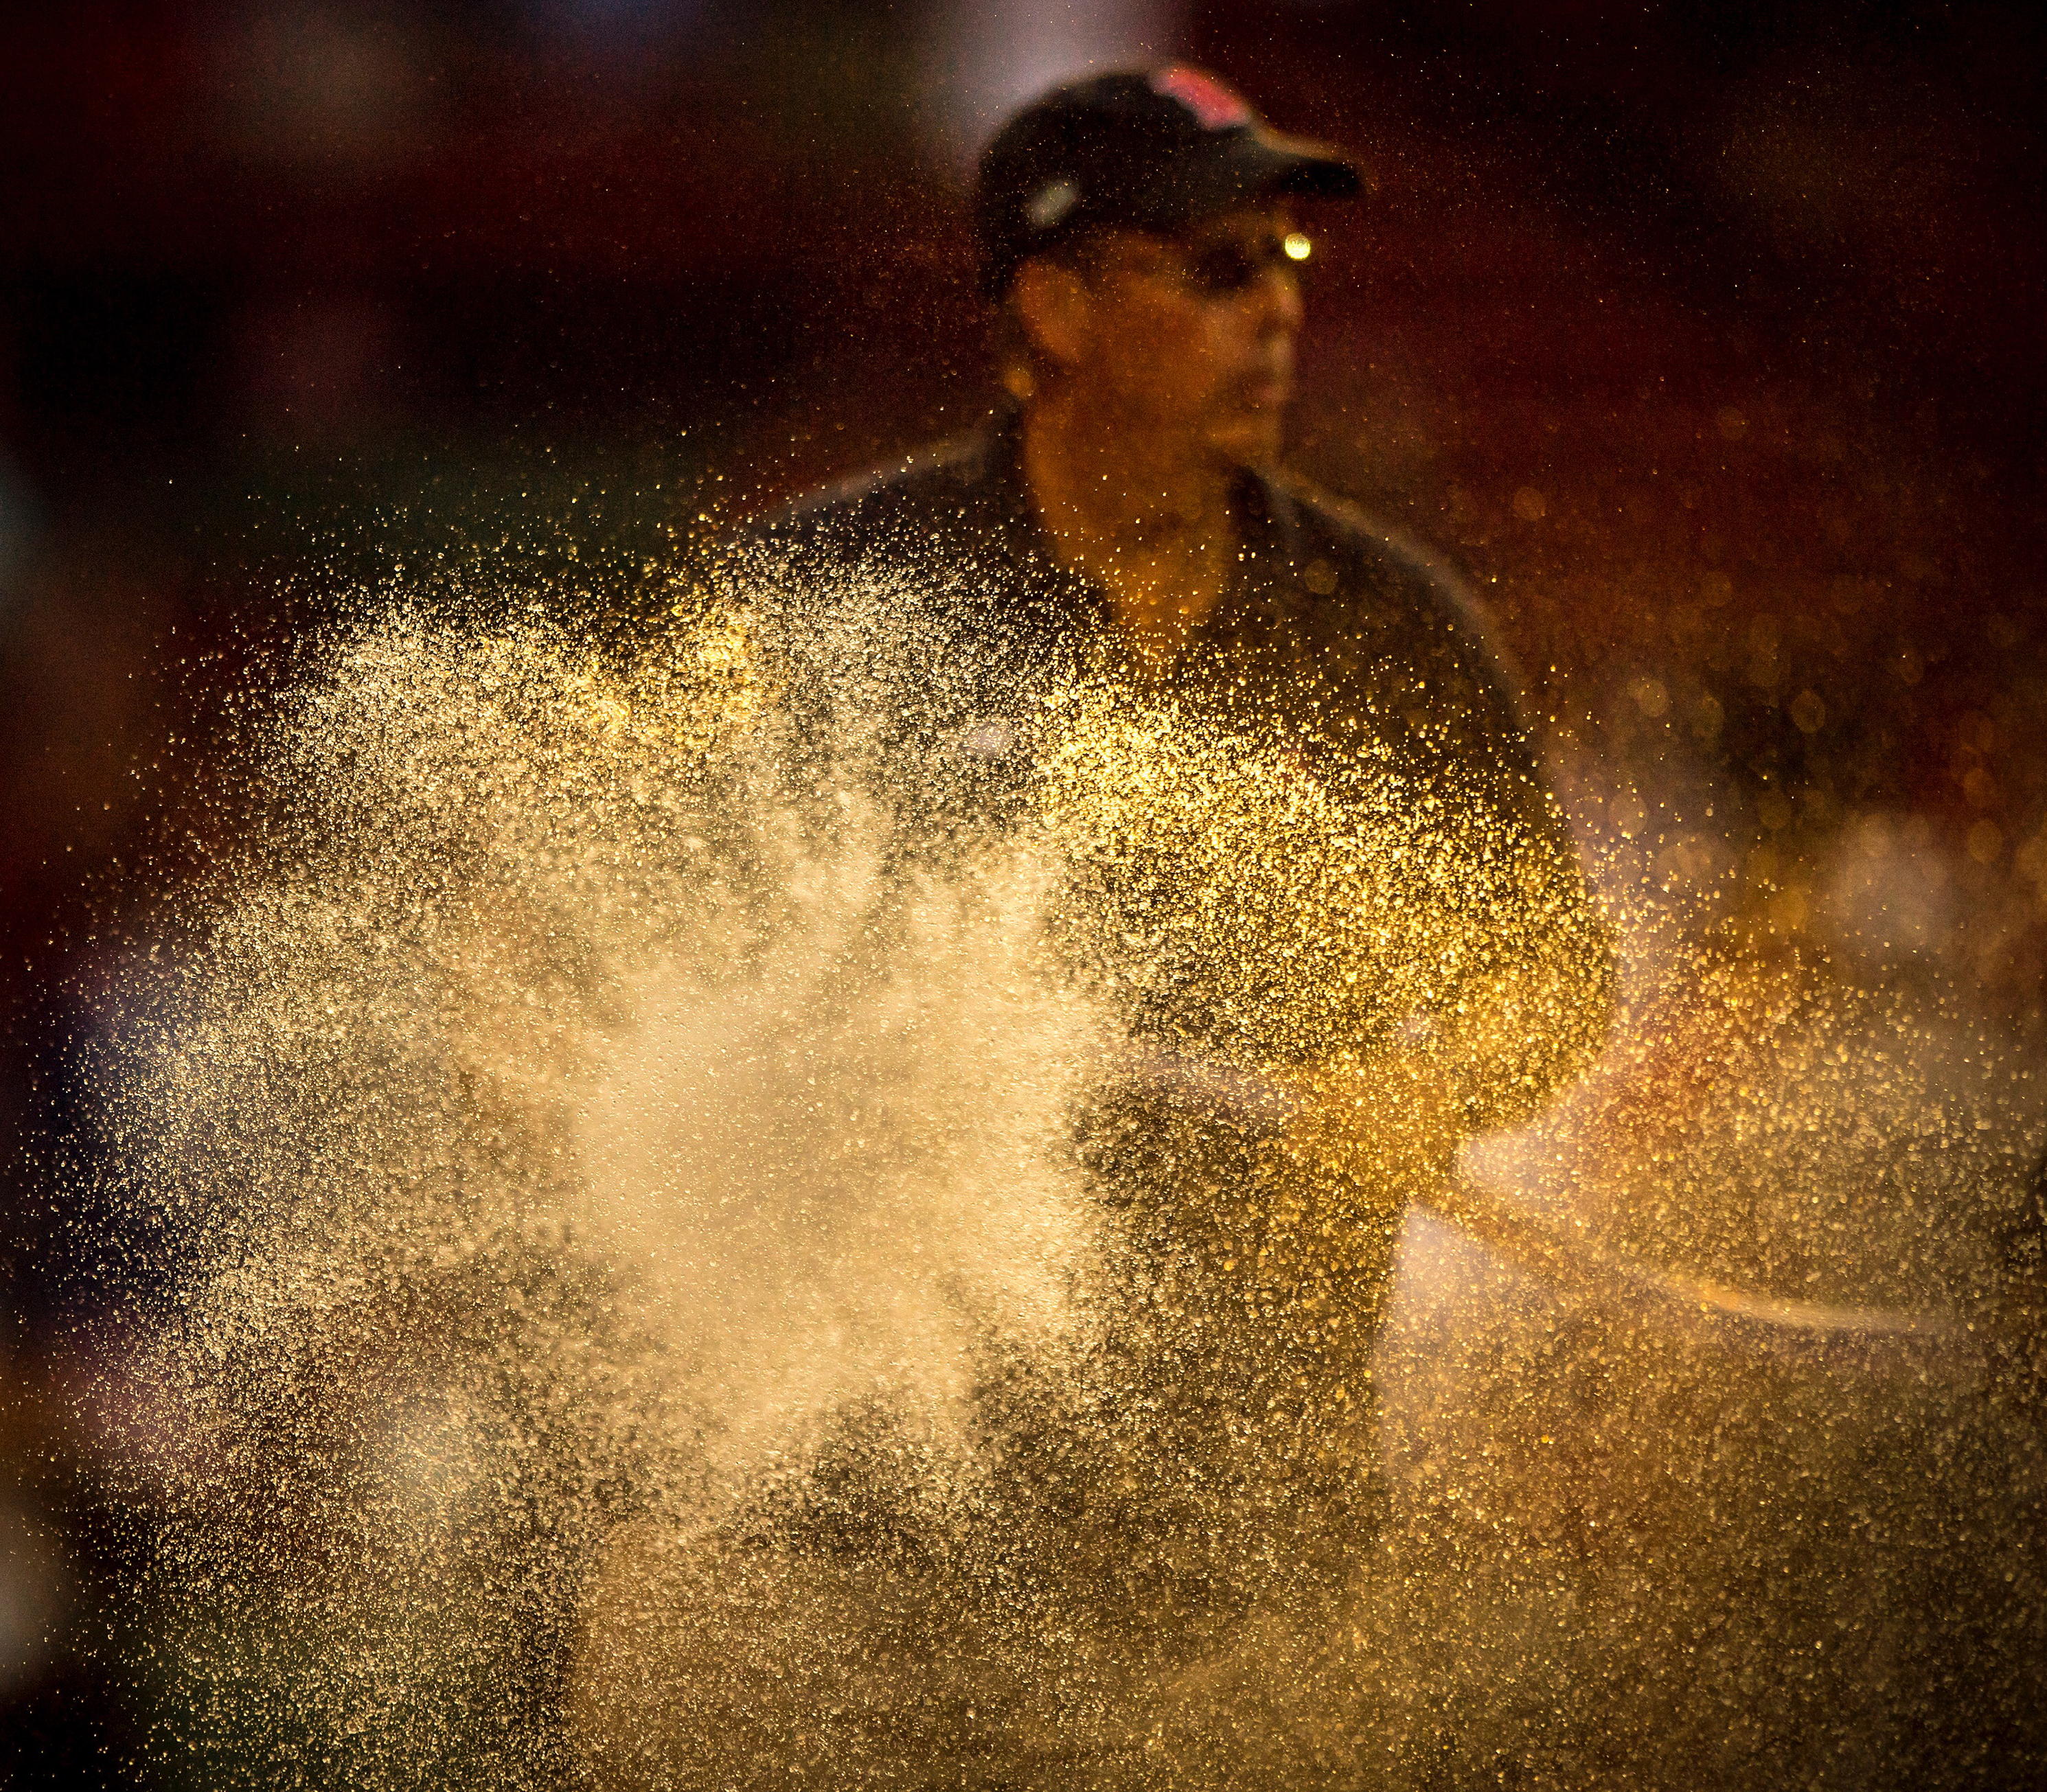 Dave Mellor sprays the hose at Fenway Park.  (Billie Weiss/Boston Red Sox/Getty)